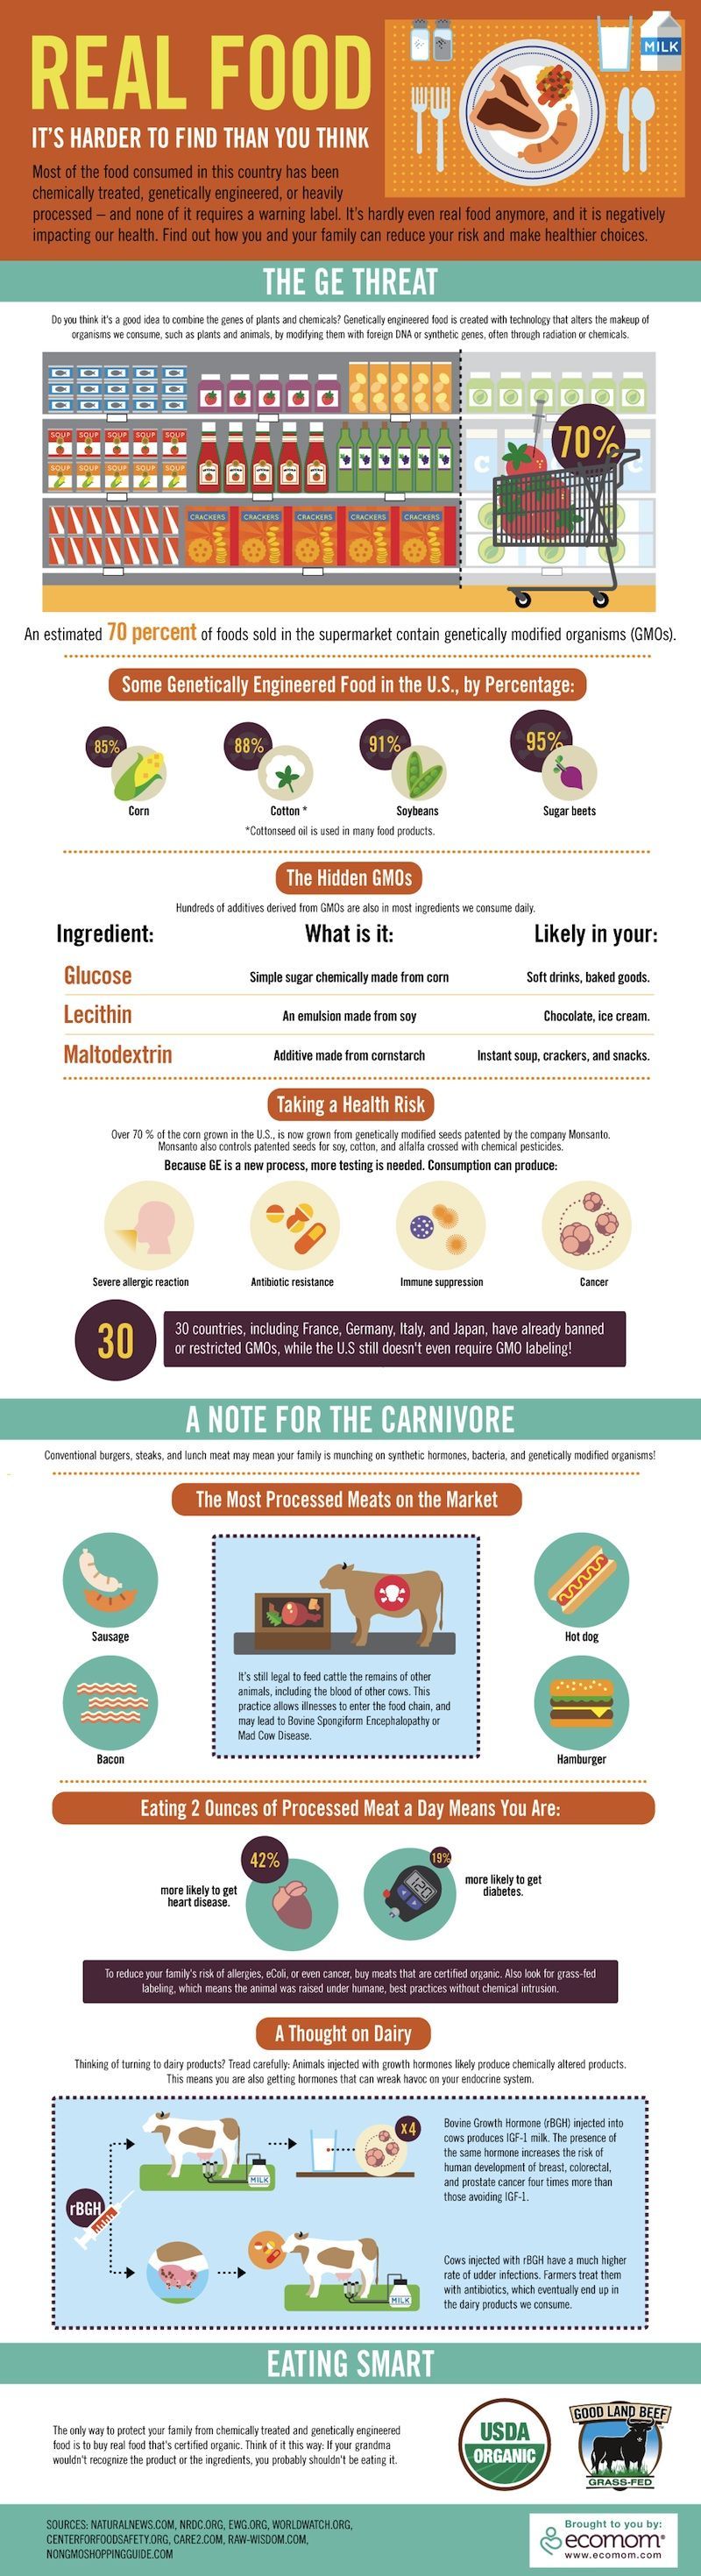 EXCELLENT infographic about how to find “real food” aka no GMO, no chemicals, not heavily processed, etc.